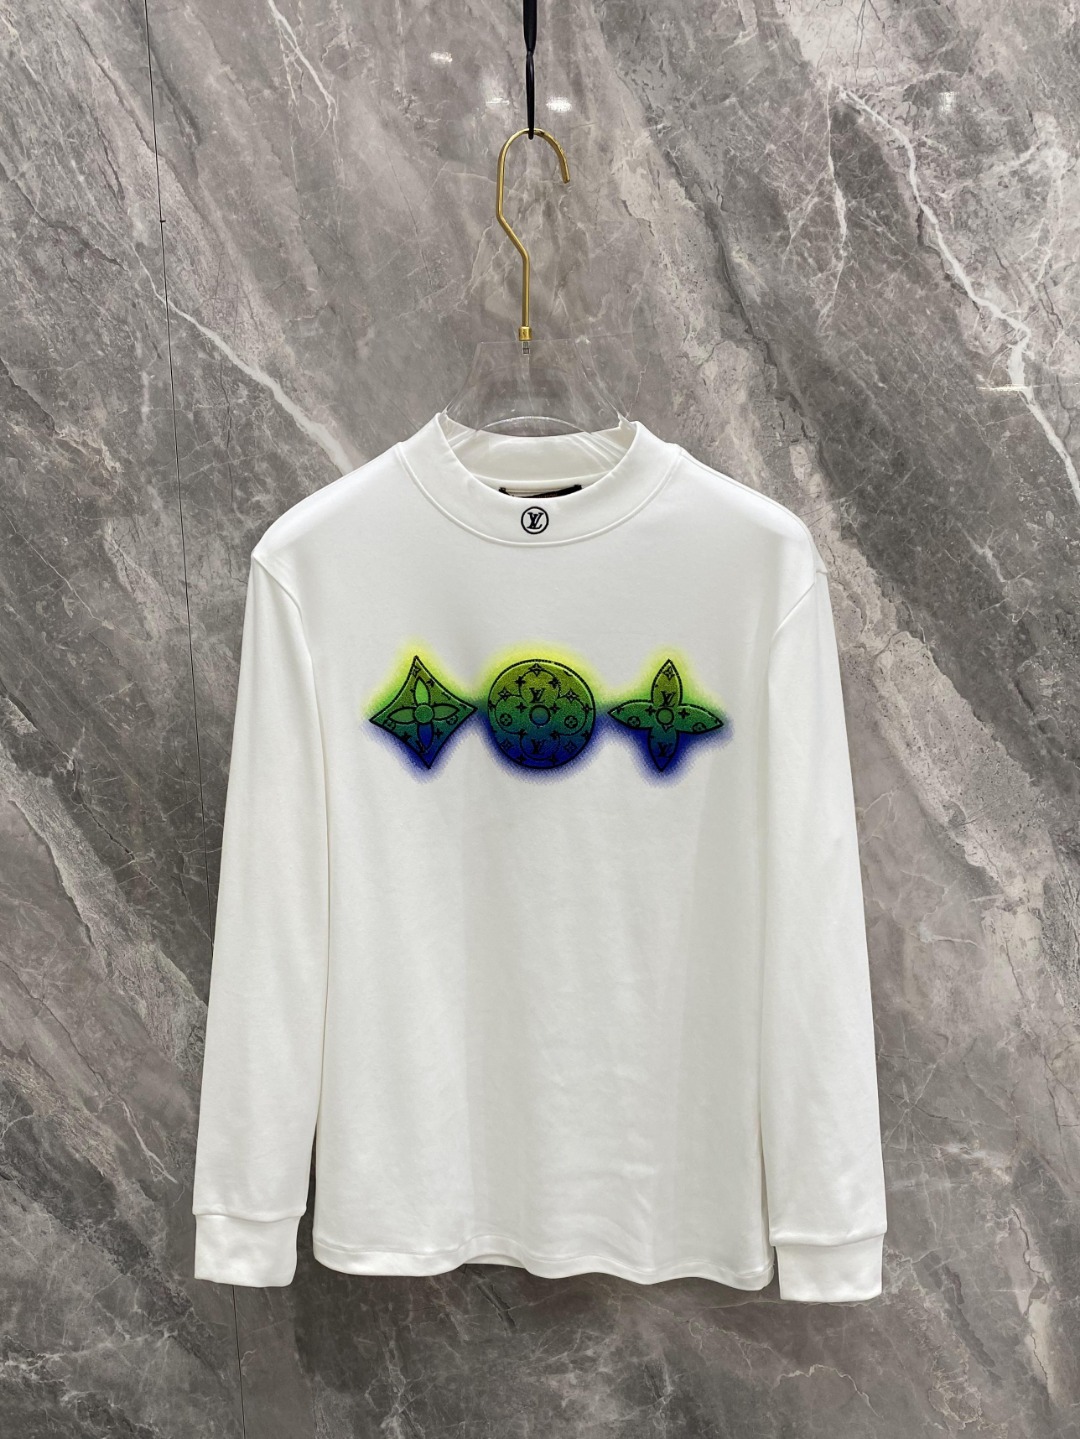 Louis Vuitton Clothing T-Shirt Black White Embroidery Unisex Cotton Fall Collection Long Sleeve